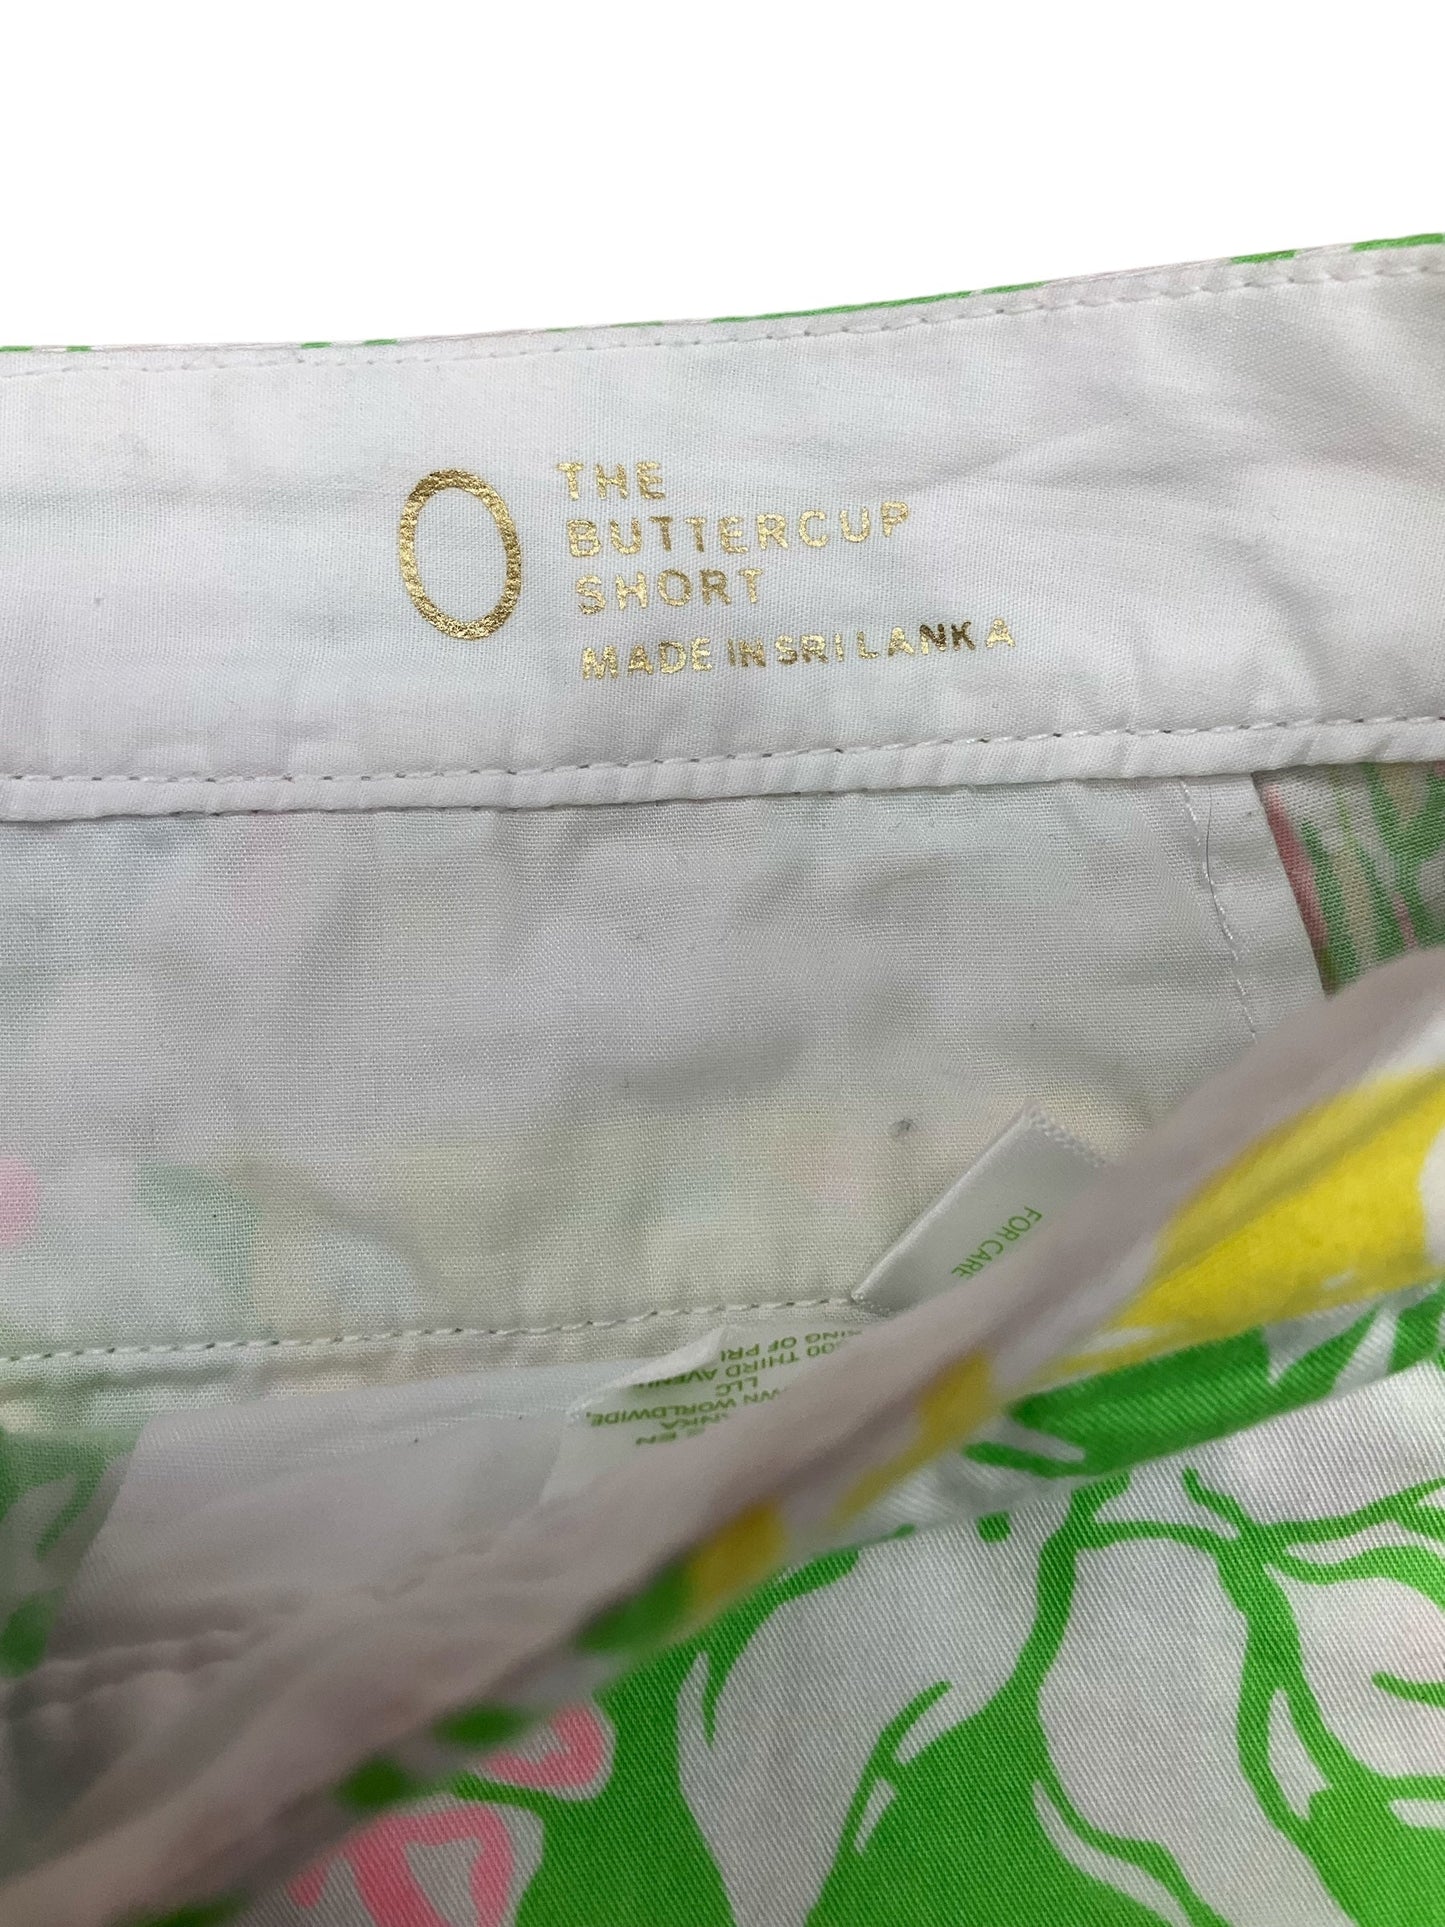 Green Shorts Lilly Pulitzer, Size 0